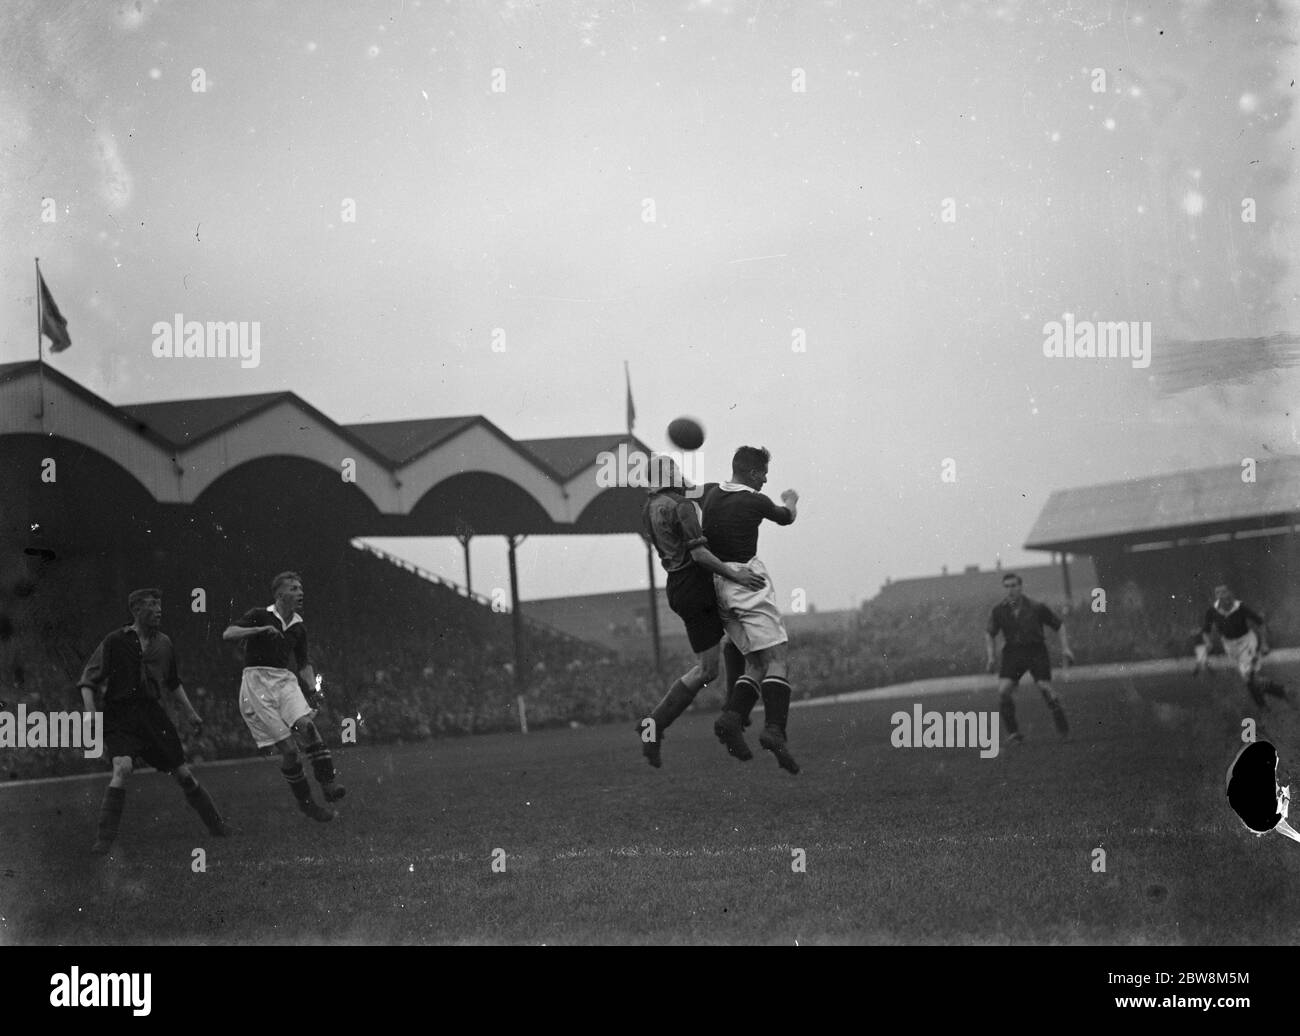 Football match ; Two players compete for the football in the air. 1935 Stock Photo